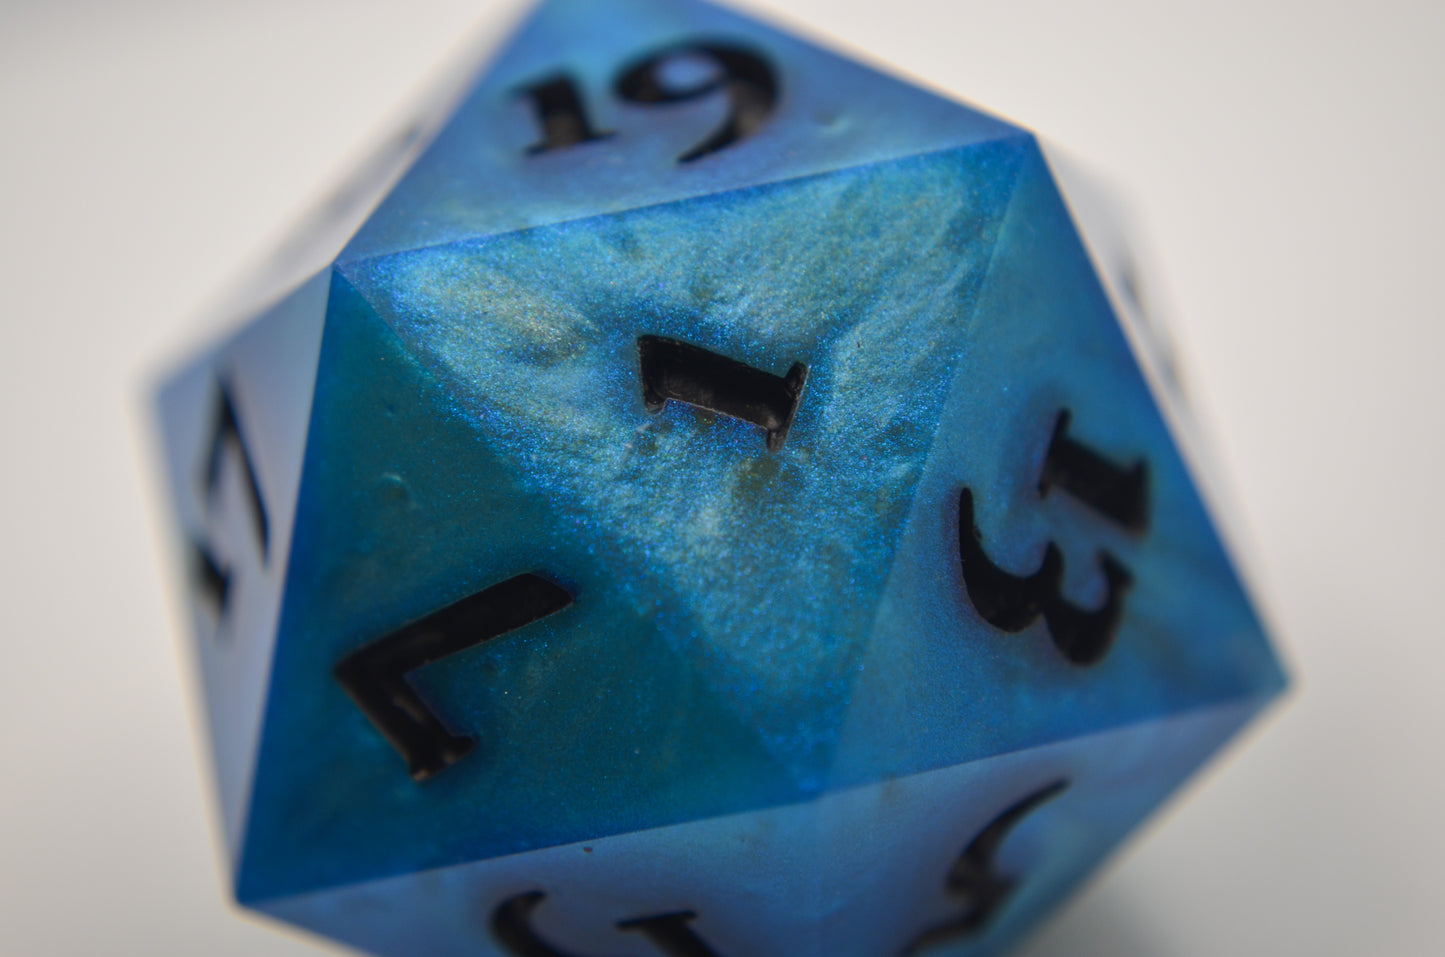 Blue and Green 30 mm Giant D20